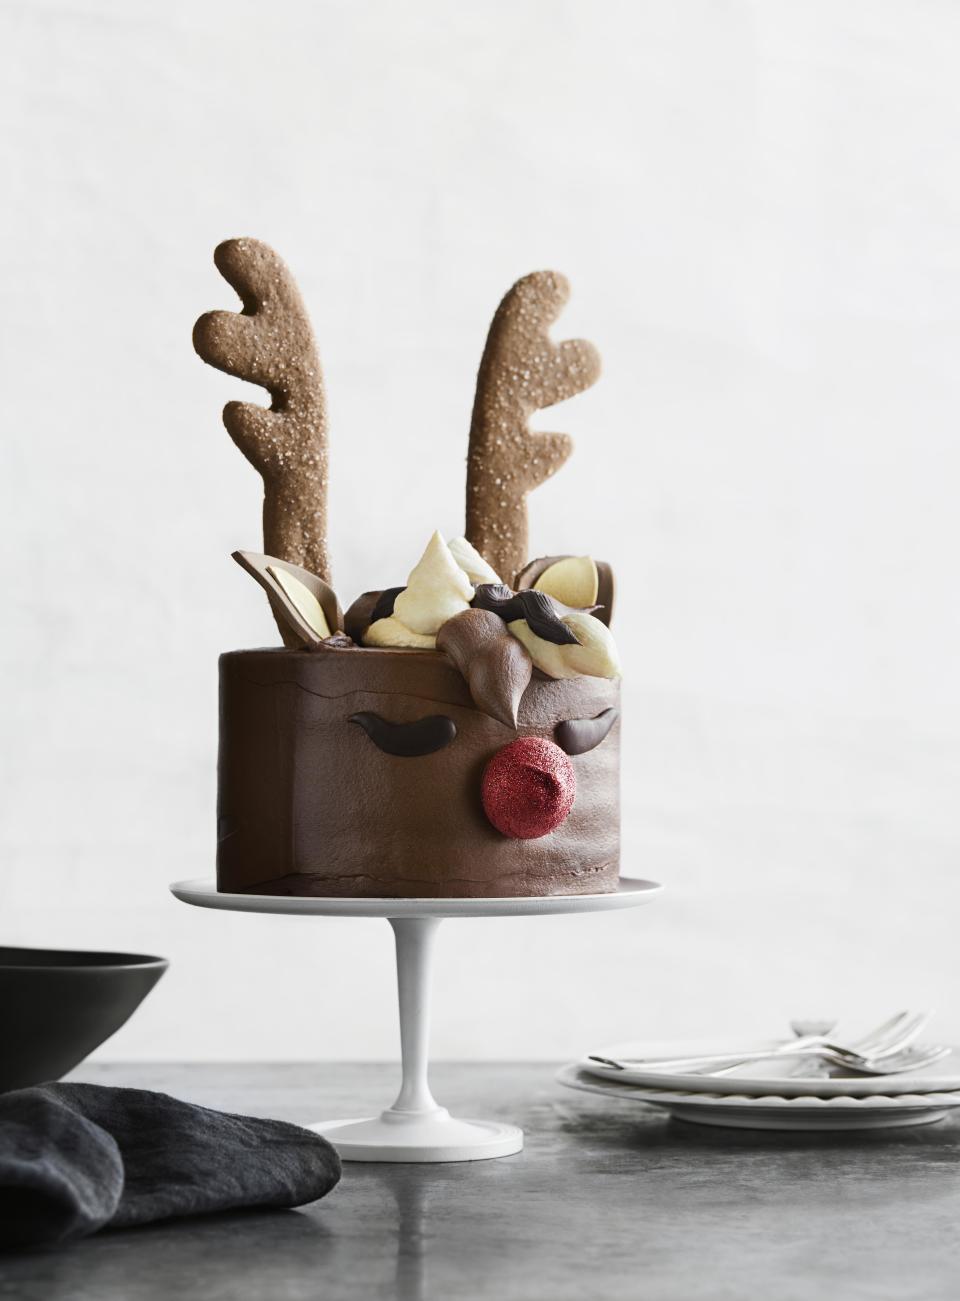 <p>And once dinner or lunch is done, it's onto dessert! This Reindeer Cake has five layers of Choc cake-rich ganache, masked in chocolate buttercream with ginger cookie antlers - $39.95 - David Jones (available at Market St, Bondi Junction, Bourke St and Wollongong)</p>